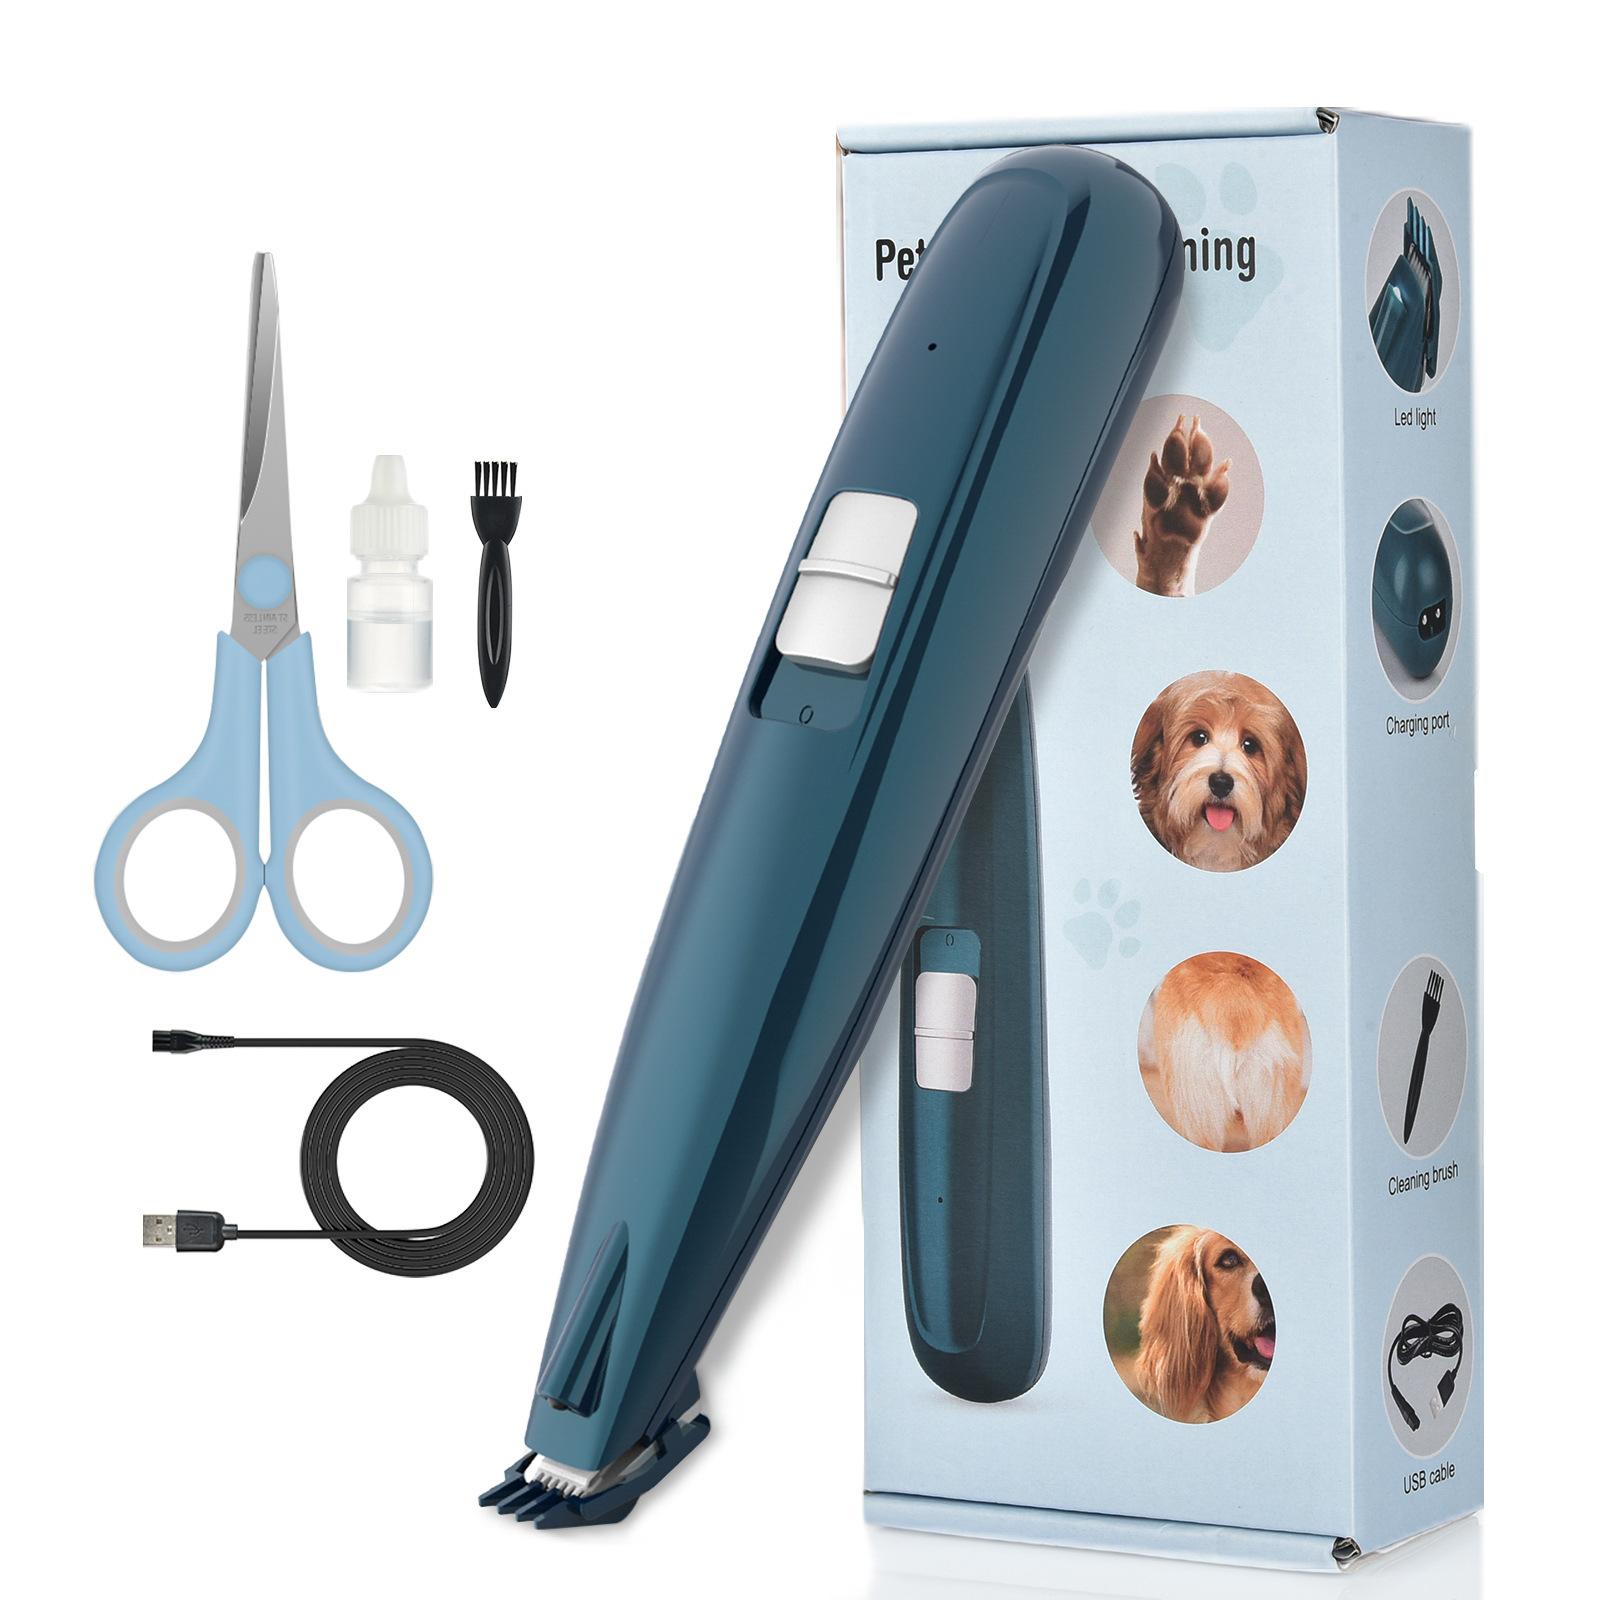 October & November Pet Shaver Hair Clippers Are Suitable for Dogs and Cats